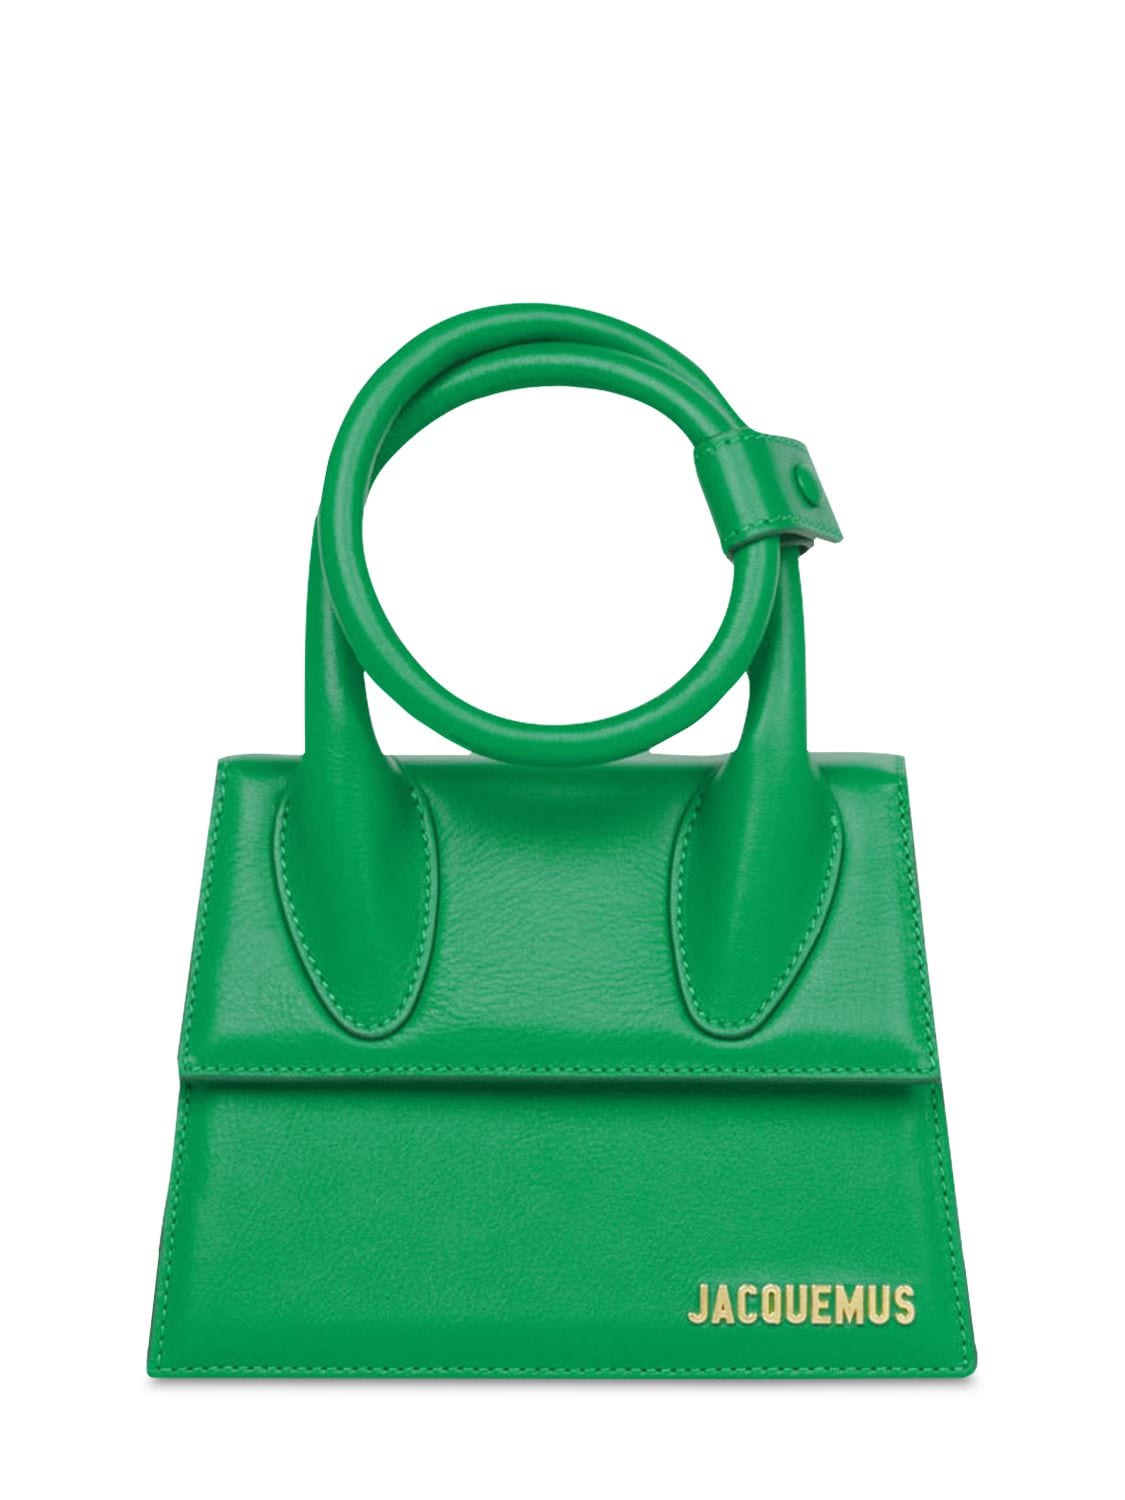 Jacquemus Le Chiquito Noeud Leather Shoulder Bag In Зелёный | ModeSens